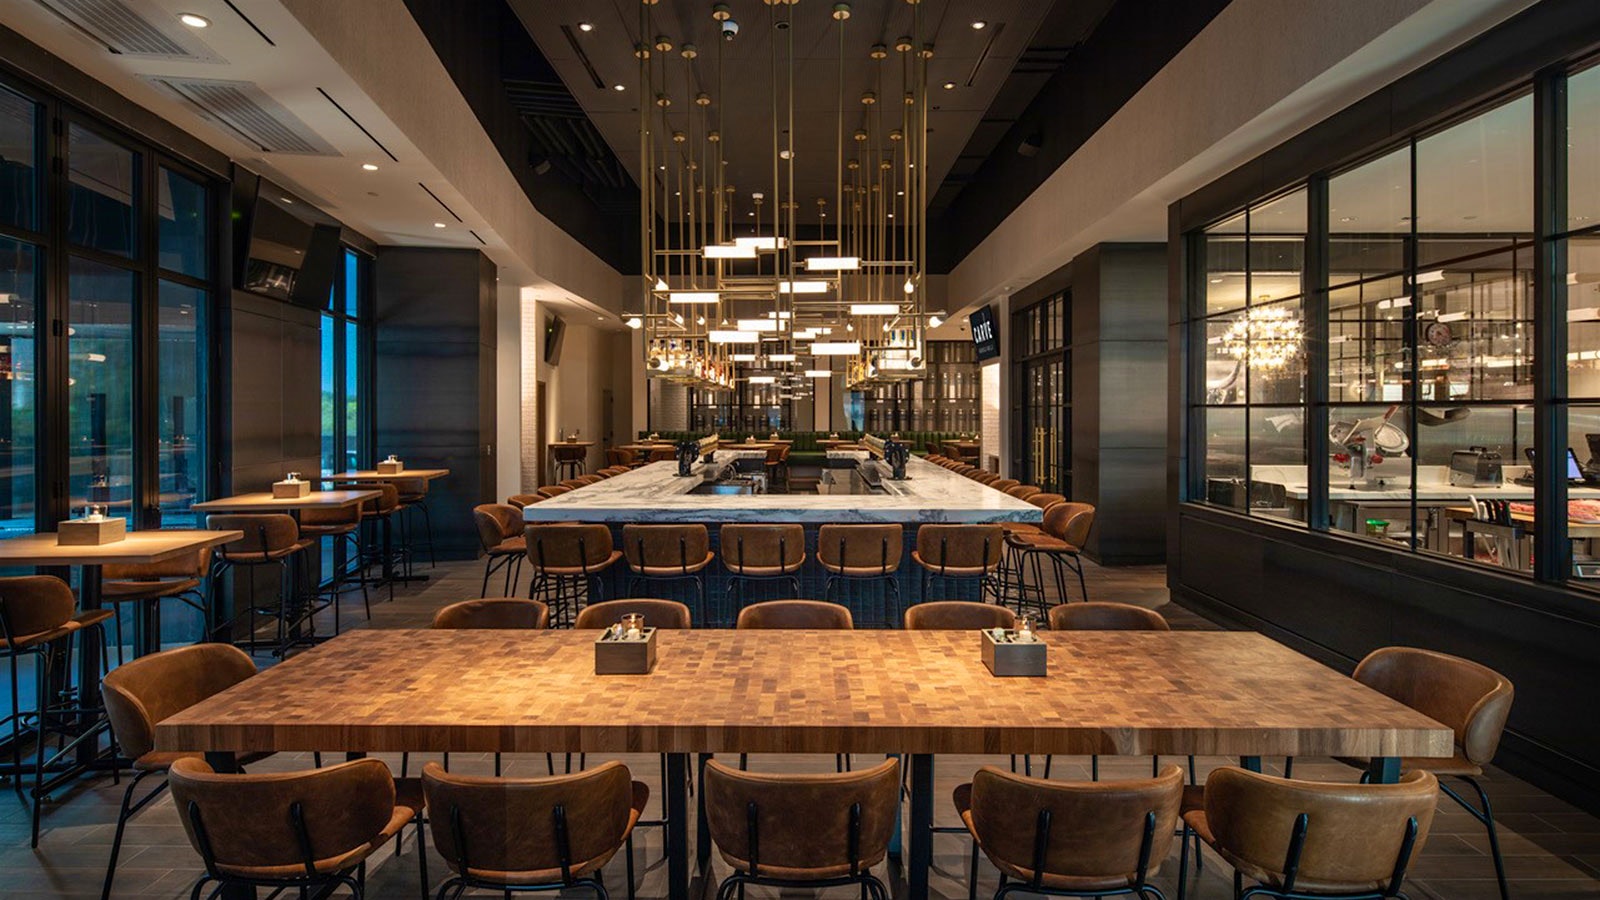  The bar area at Carve American Grille in central Austin with a rectangular marble bar with dangling lights overhead, two-person bar tables along the windows, a large 12-person table in front, and a glassed-in kitchen area to the right